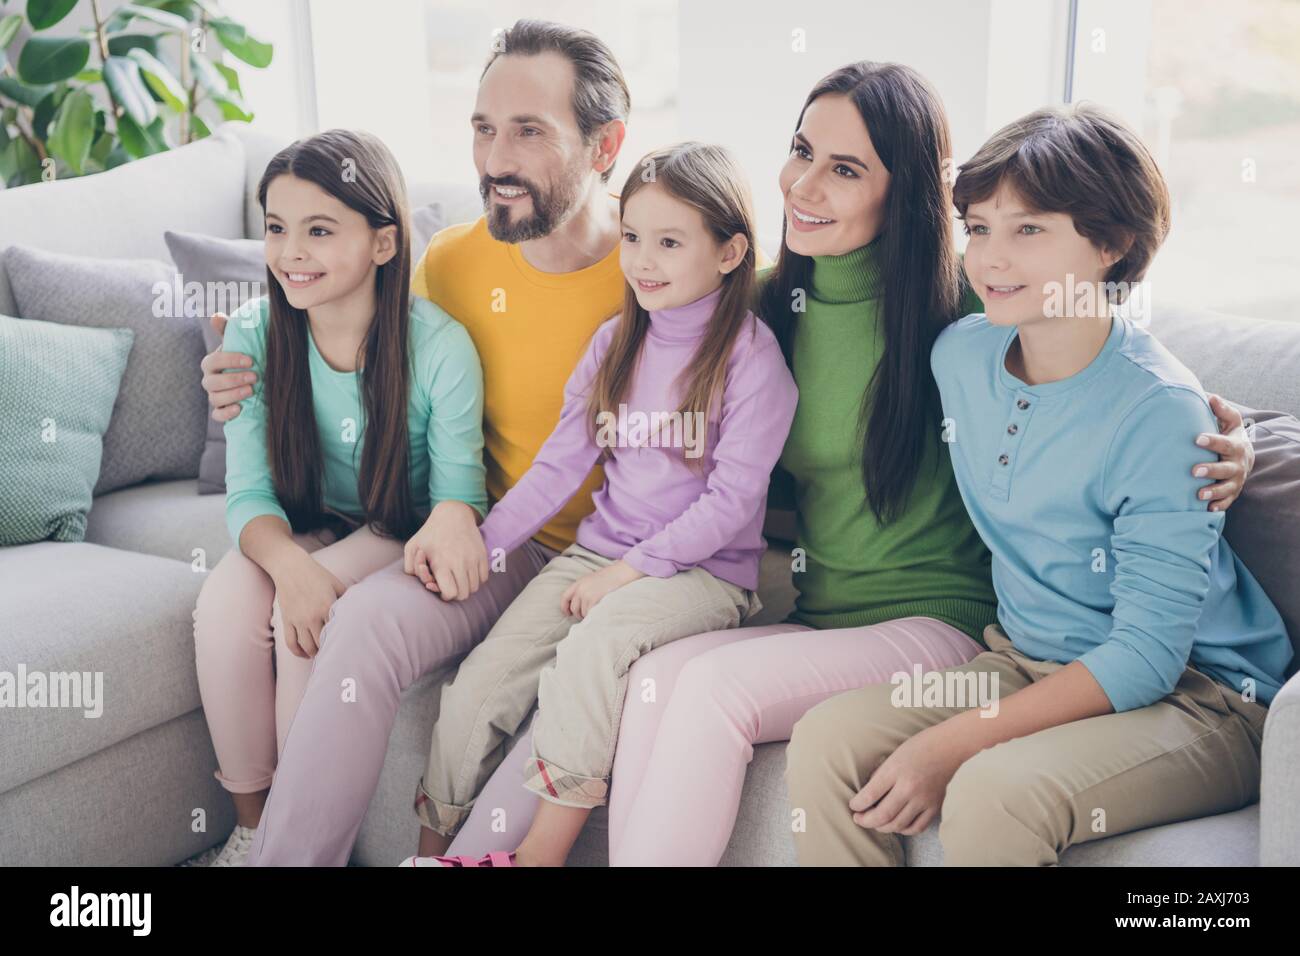 https://c8.alamy.com/comp/2AXJ703/loving-dream-harmony-cozy-family-five-people-watch-tv-sit-couch-enjoy-cartoons-dad-mom-hug-her-preteen-younger-older-adopted-children-in-room-house-2AXJ703.jpg